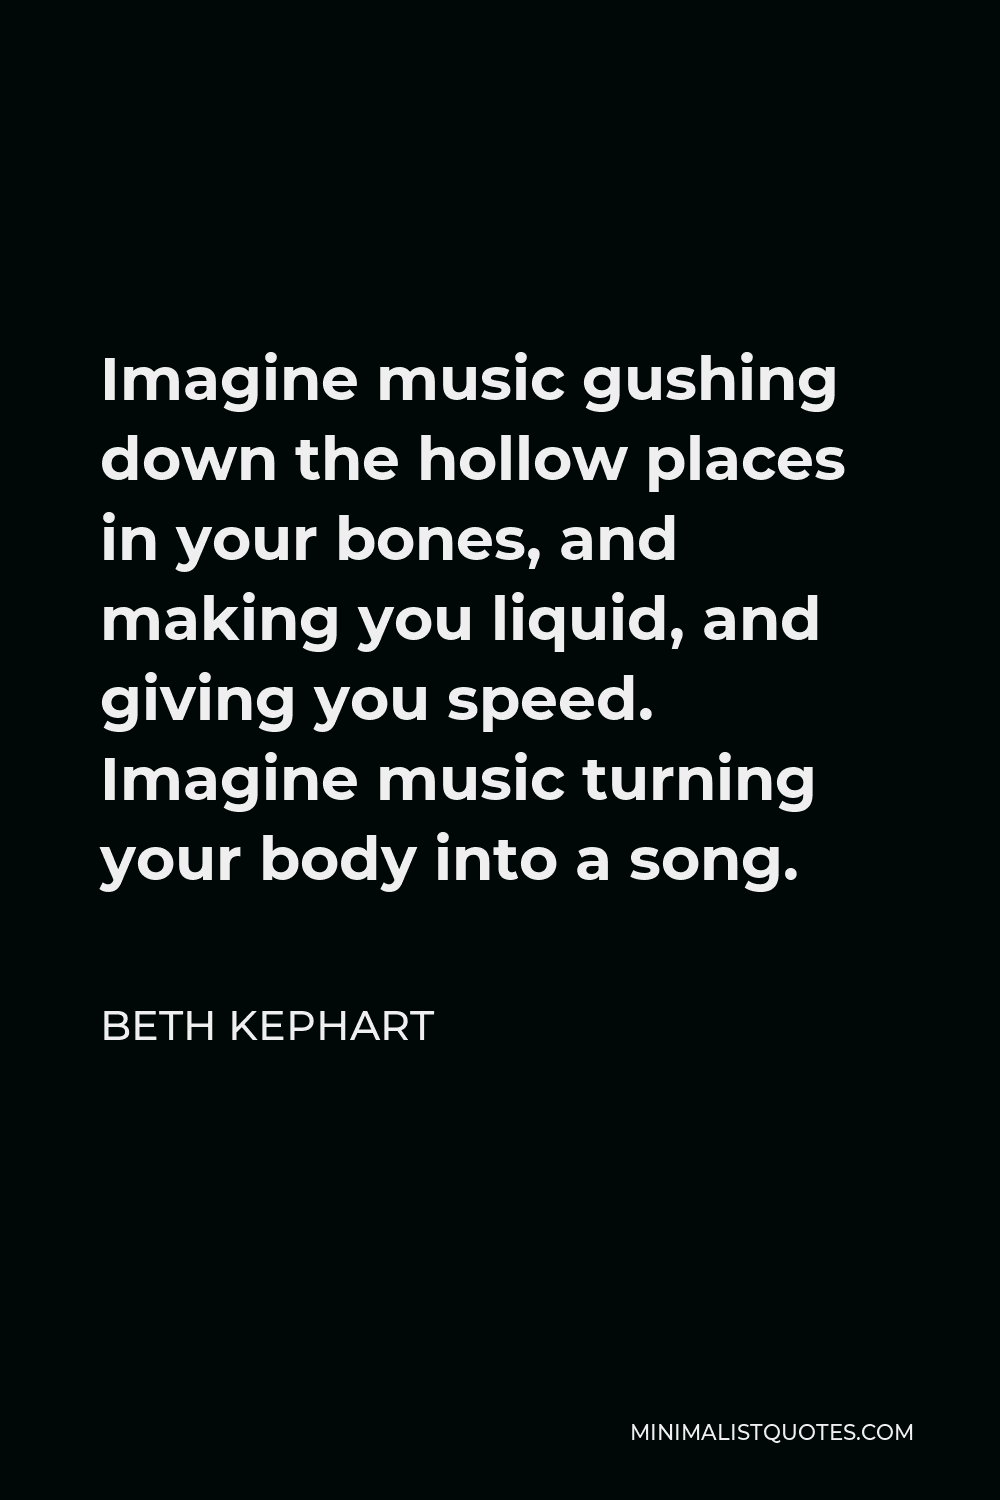 Beth Kephart Quote - Imagine music gushing down the hollow places in your bones, and making you liquid, and giving you speed. Imagine music turning your body into a song.